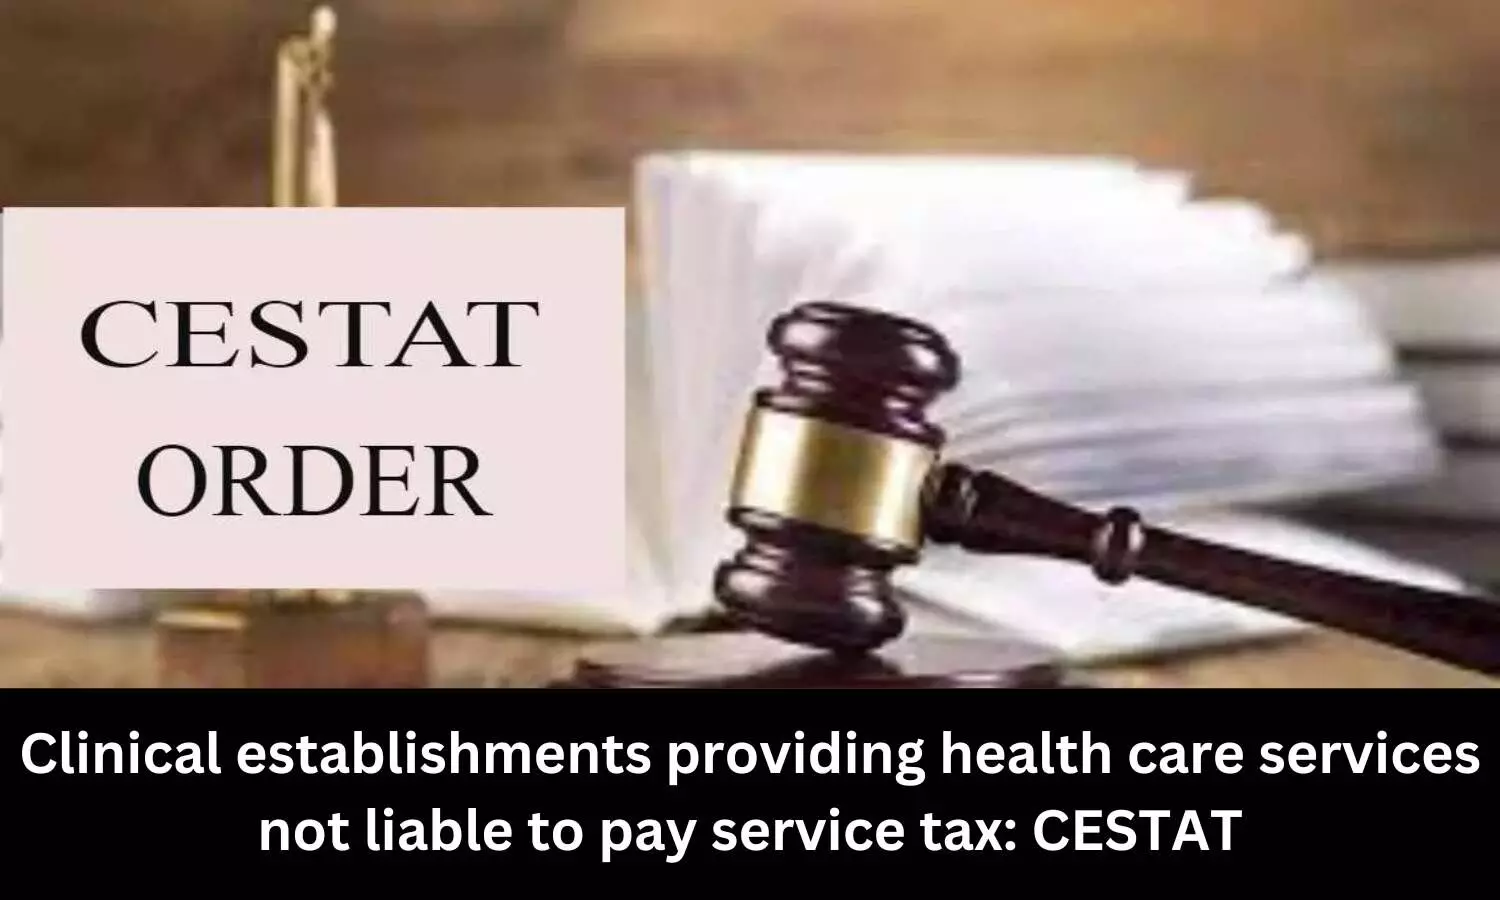 Clinical establishments providing health care services not liable to pay service tax: CESTAT